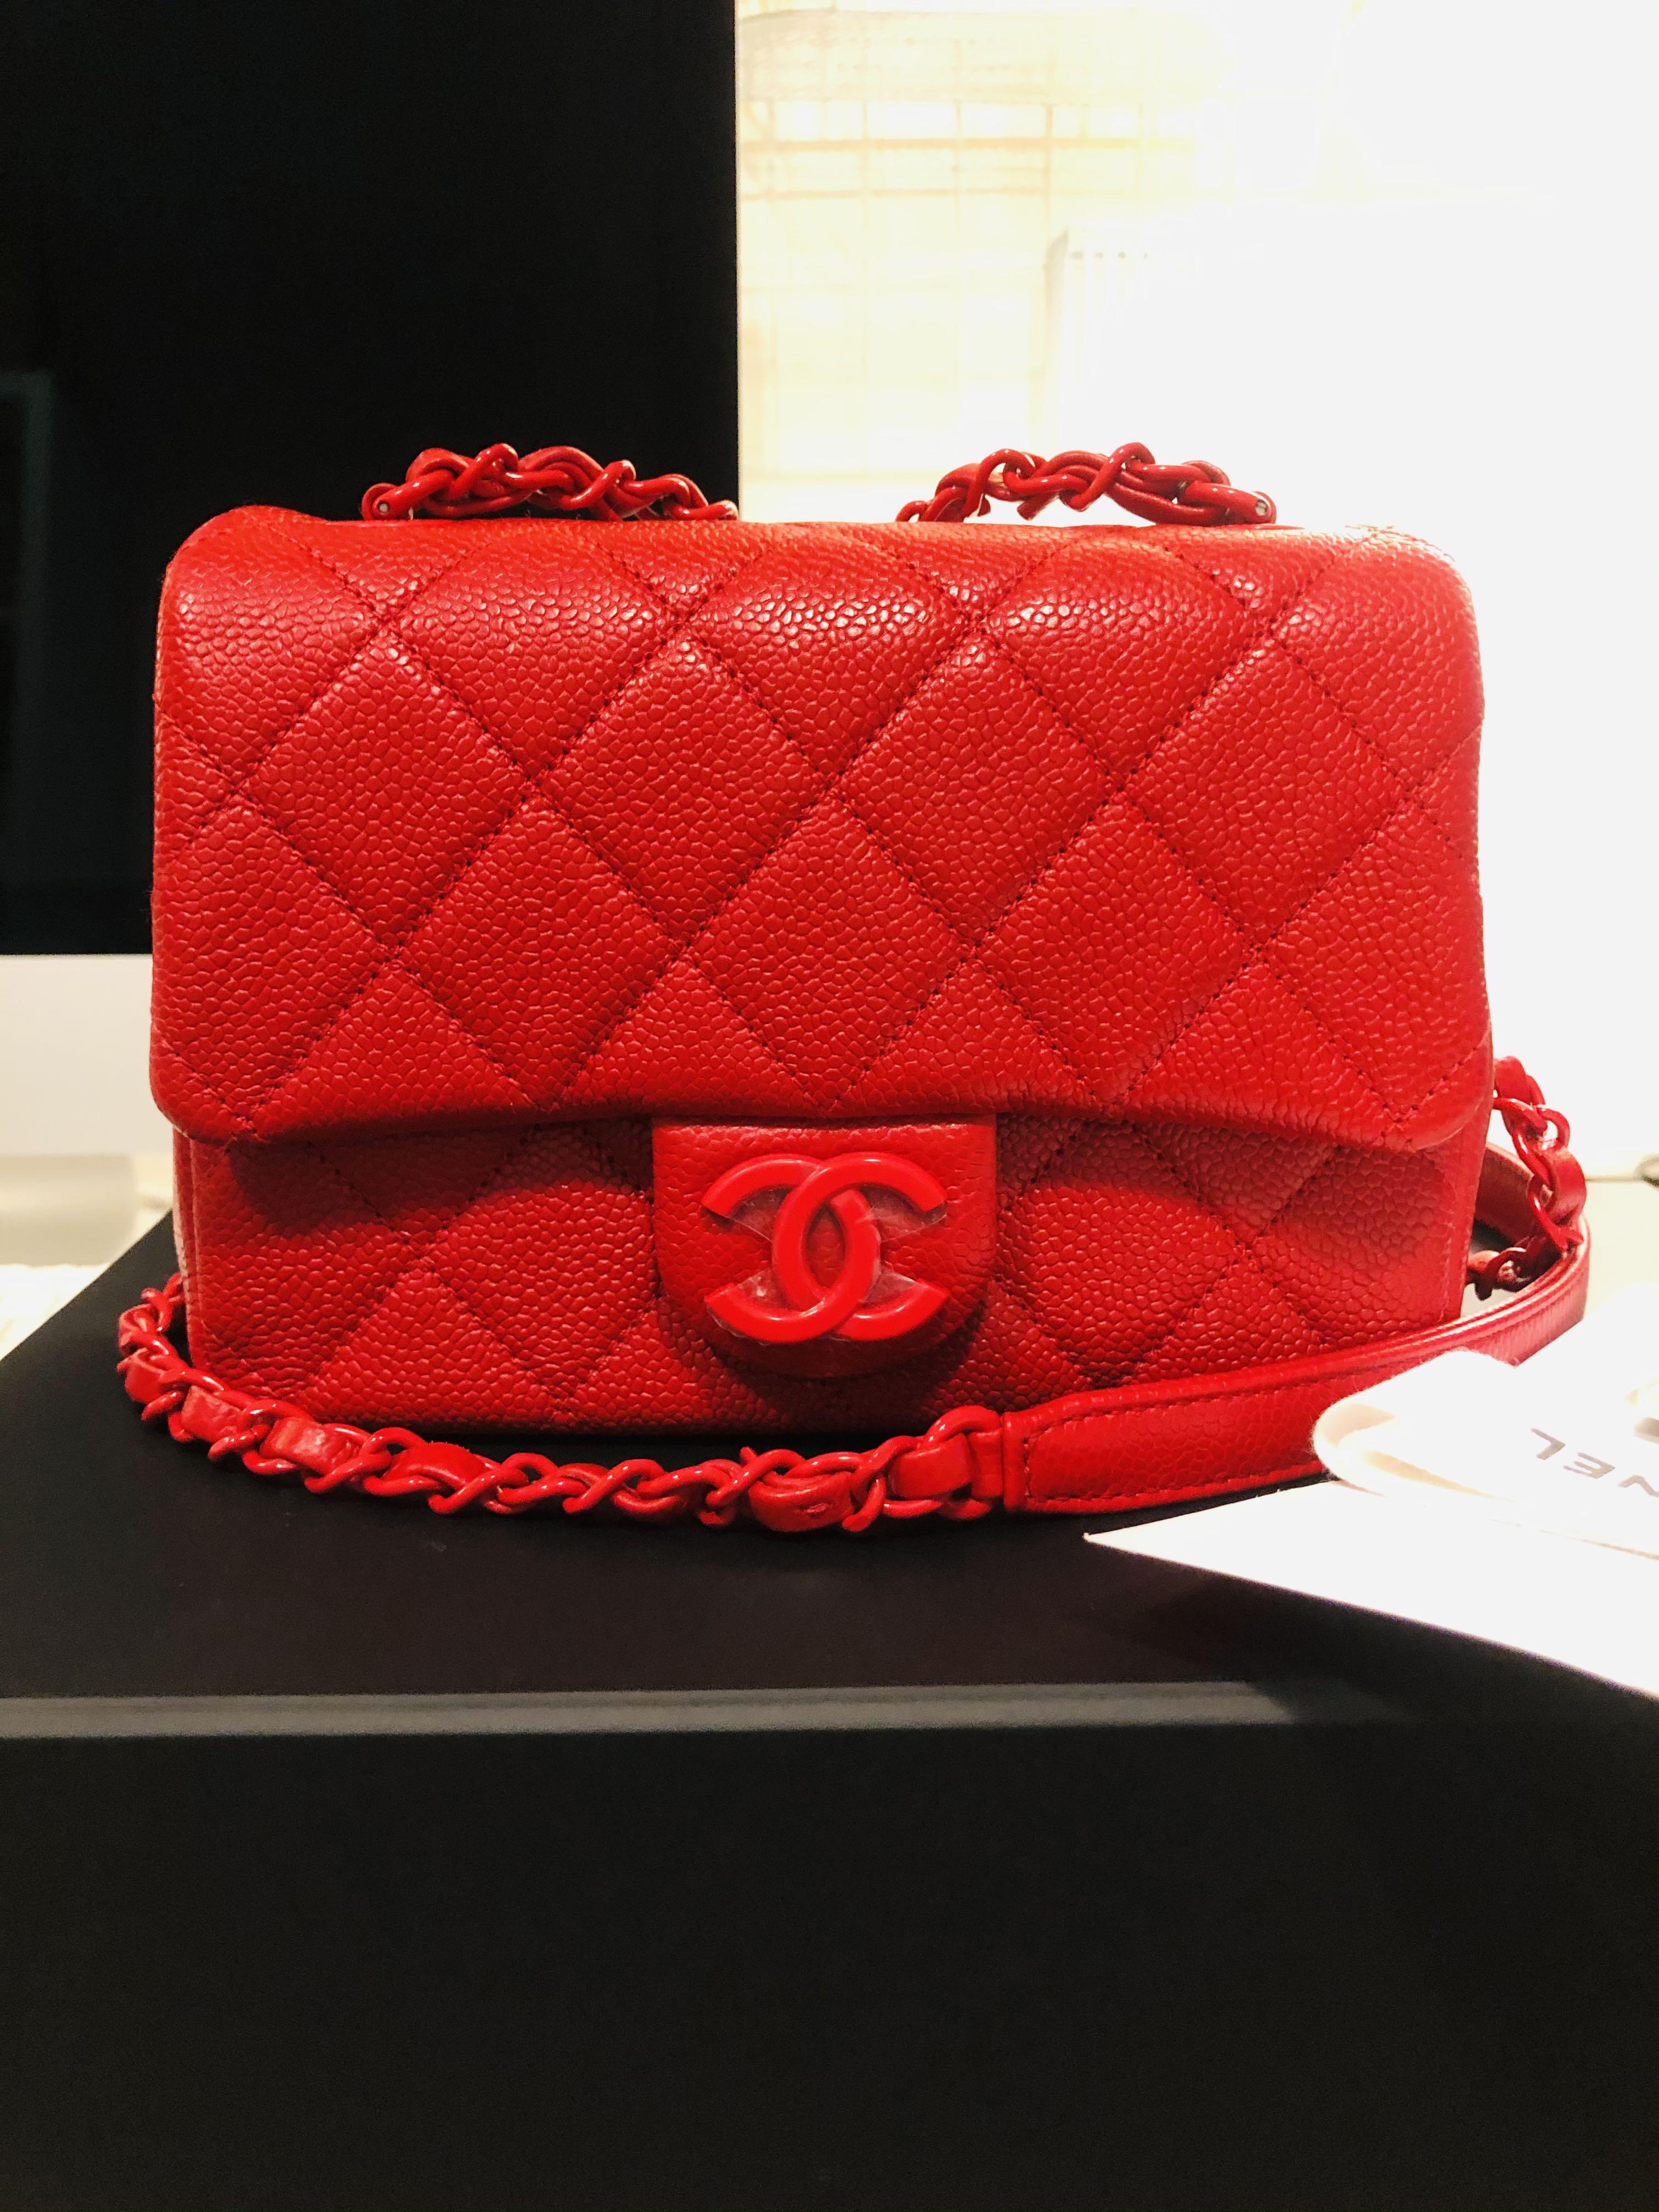 These CHANEL SpringSummer 2020 Bags Will Be Big in 2020  Prestige Online   Indonesia